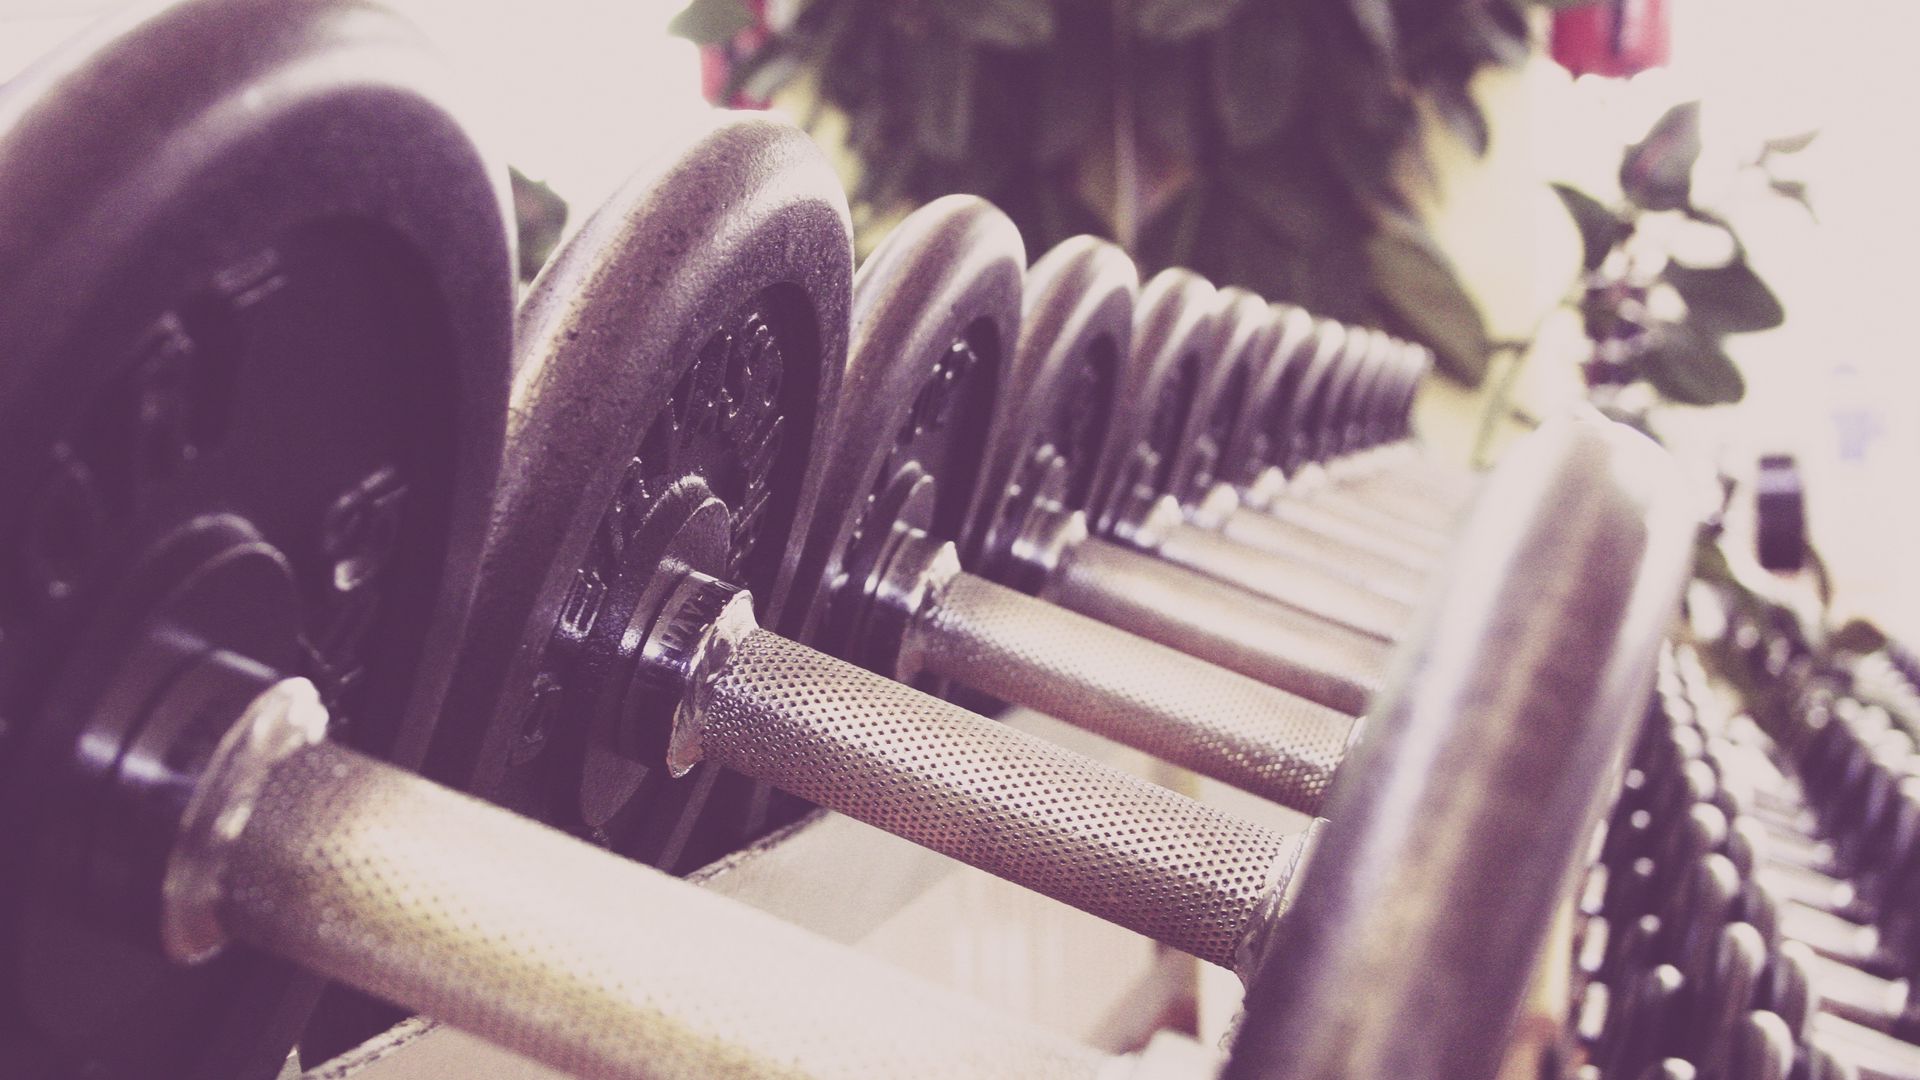 Download wallpaper 1920x1080 dumbbells, sports, gym full hd, hdtv, fhd, 1080p  hd background